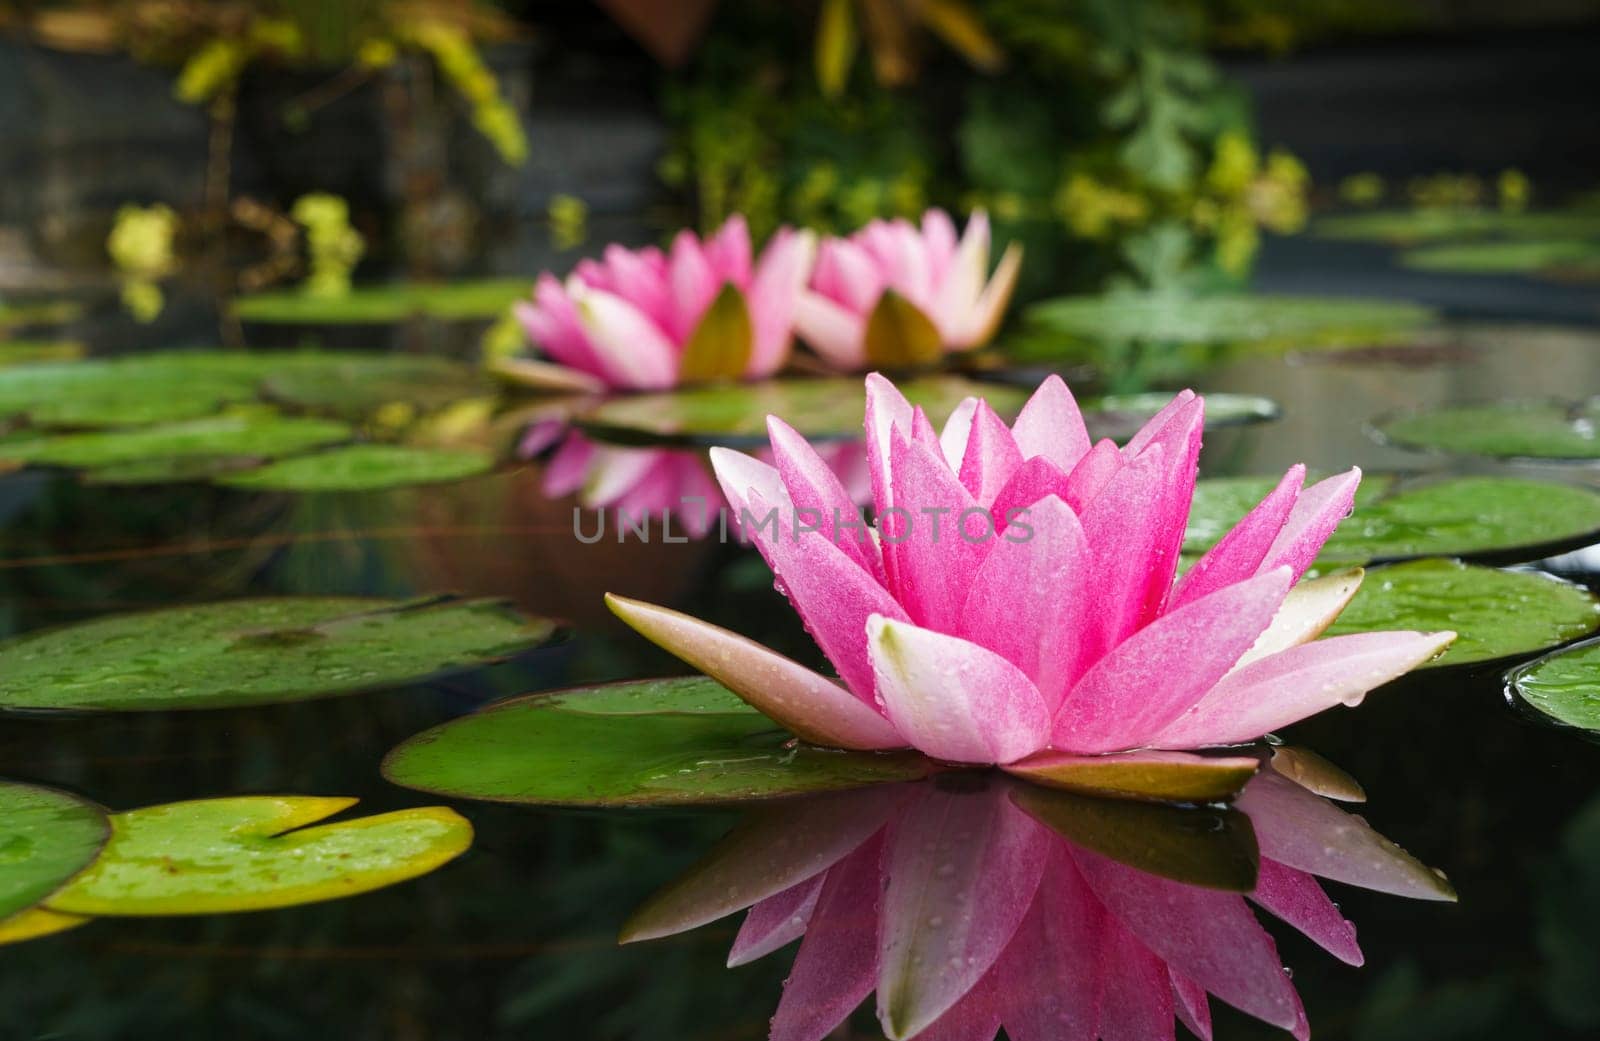 Water lily flower in shades of pink with green leaves in a pool of water, shallow depth of field.